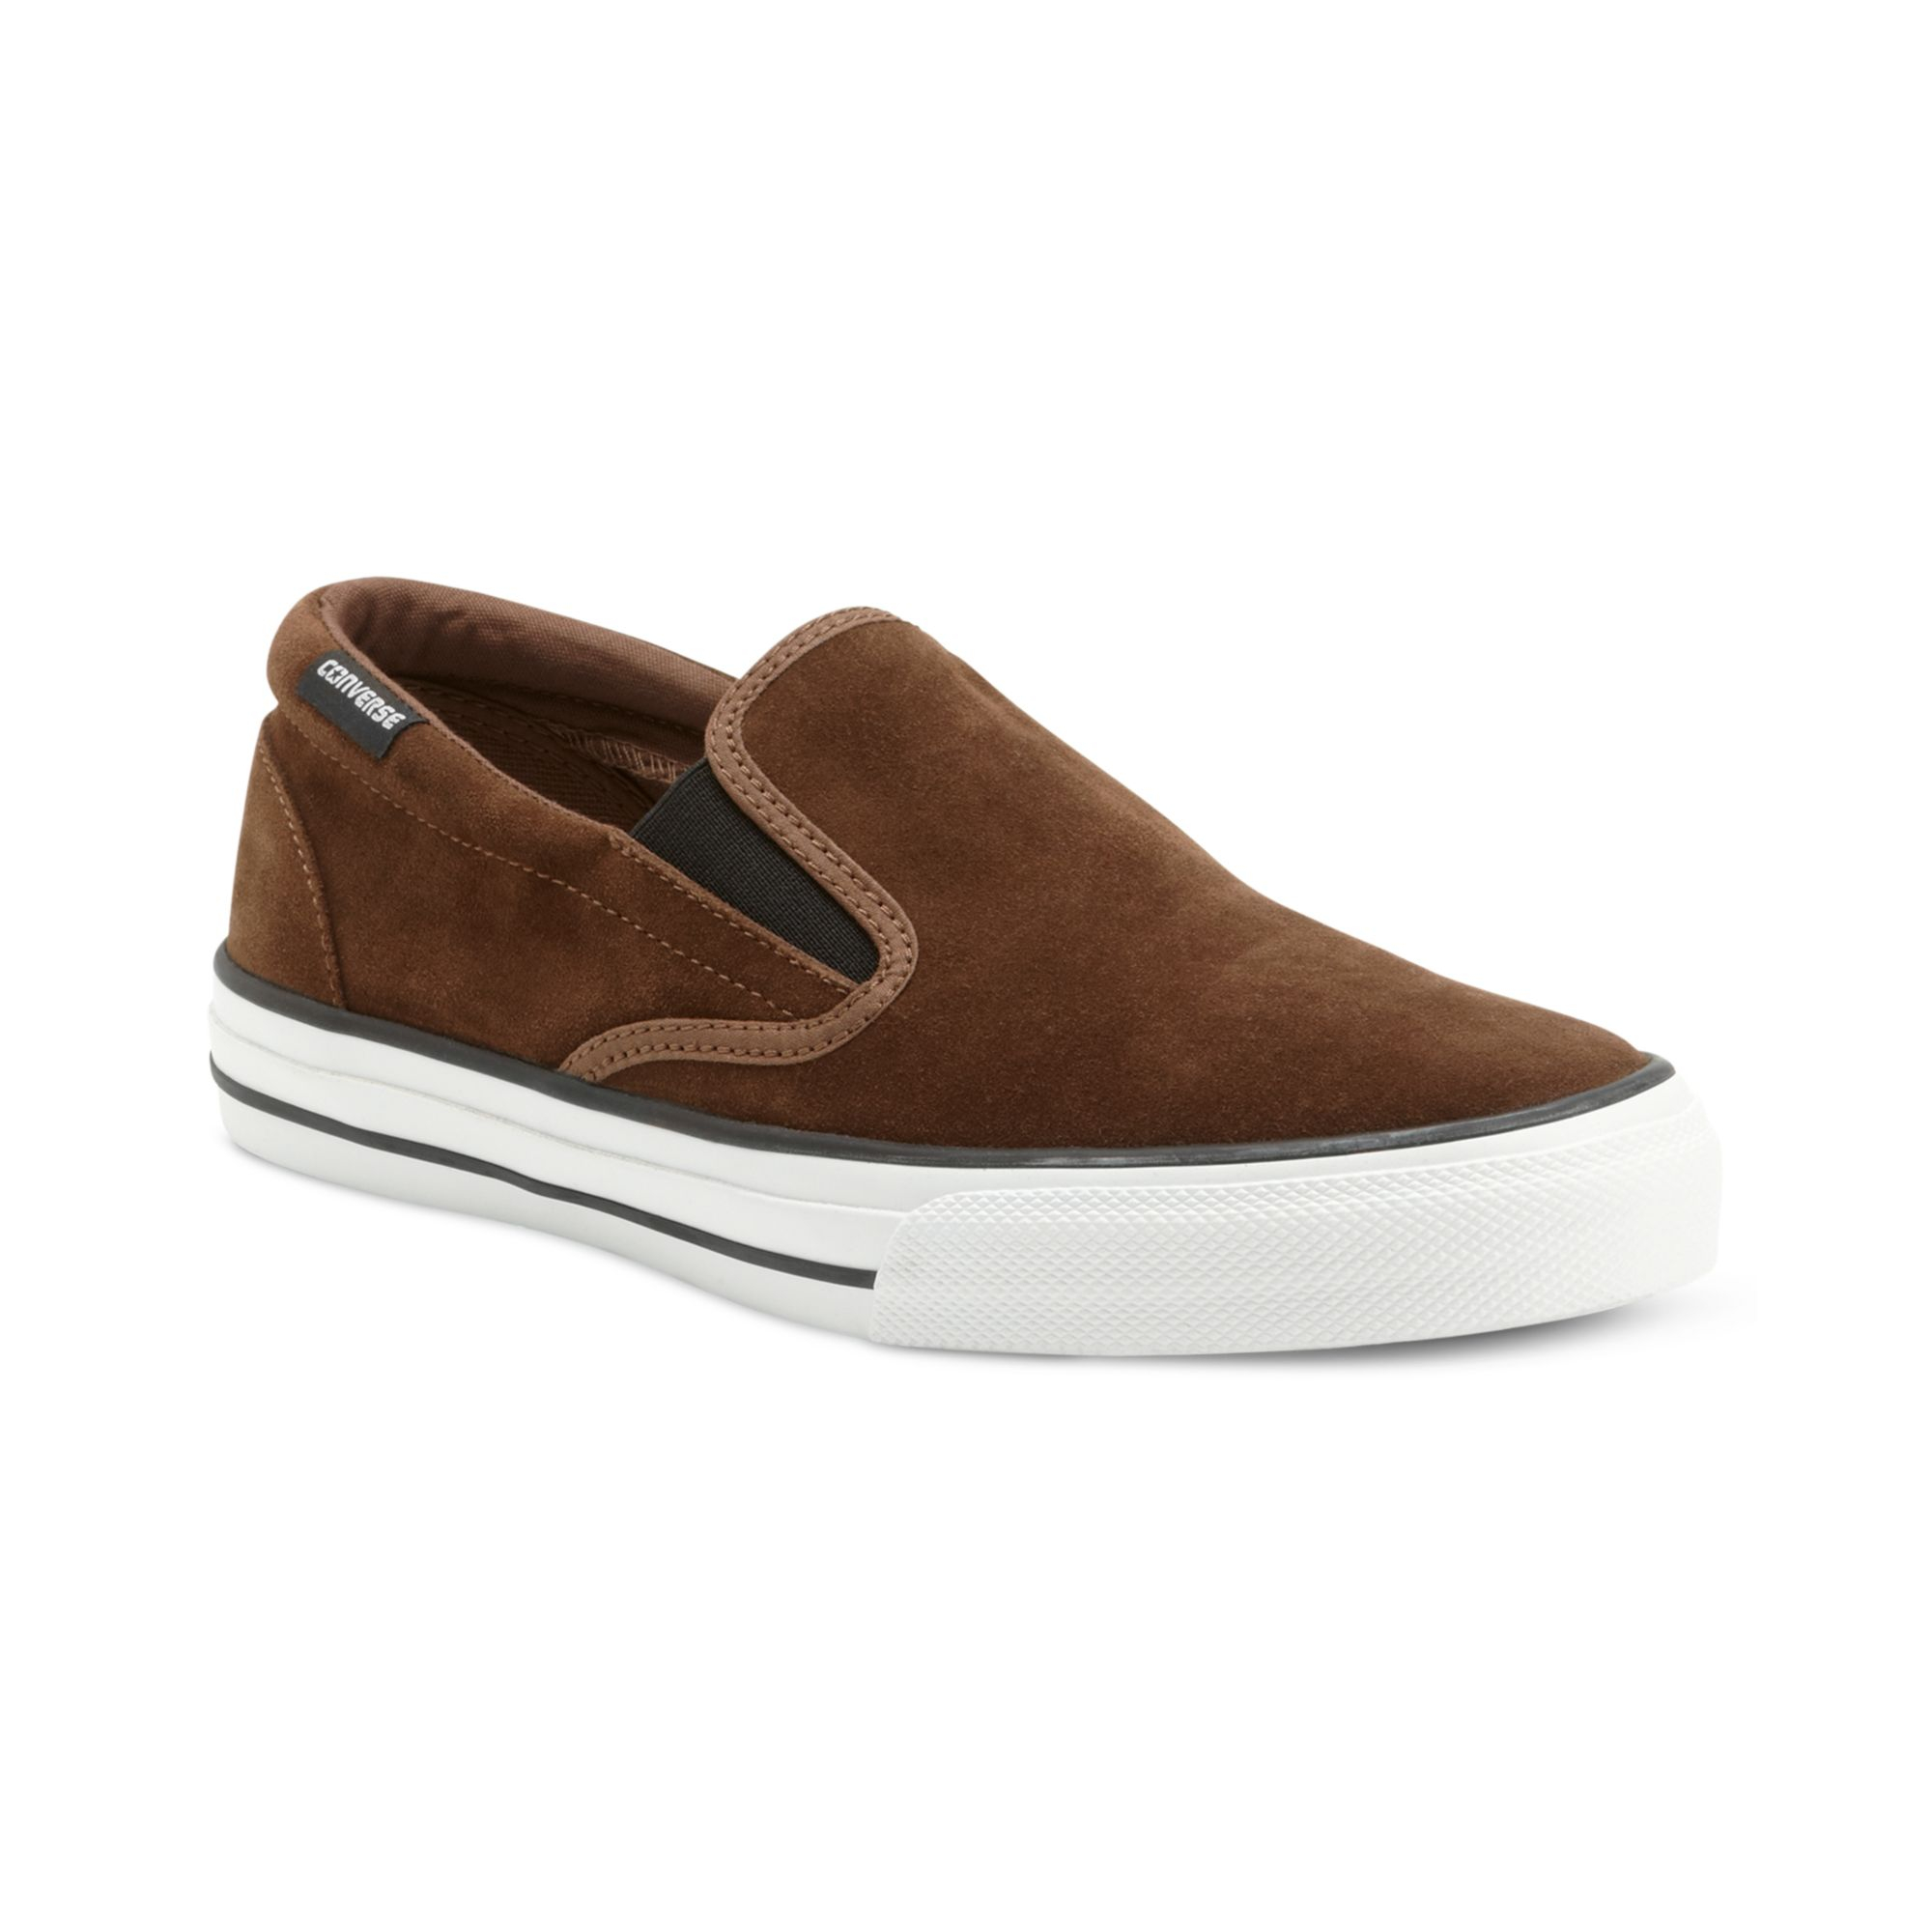 Lyst - Converse Mens Skidgrip Ev Sneakers From Finish Line in Brown for Men